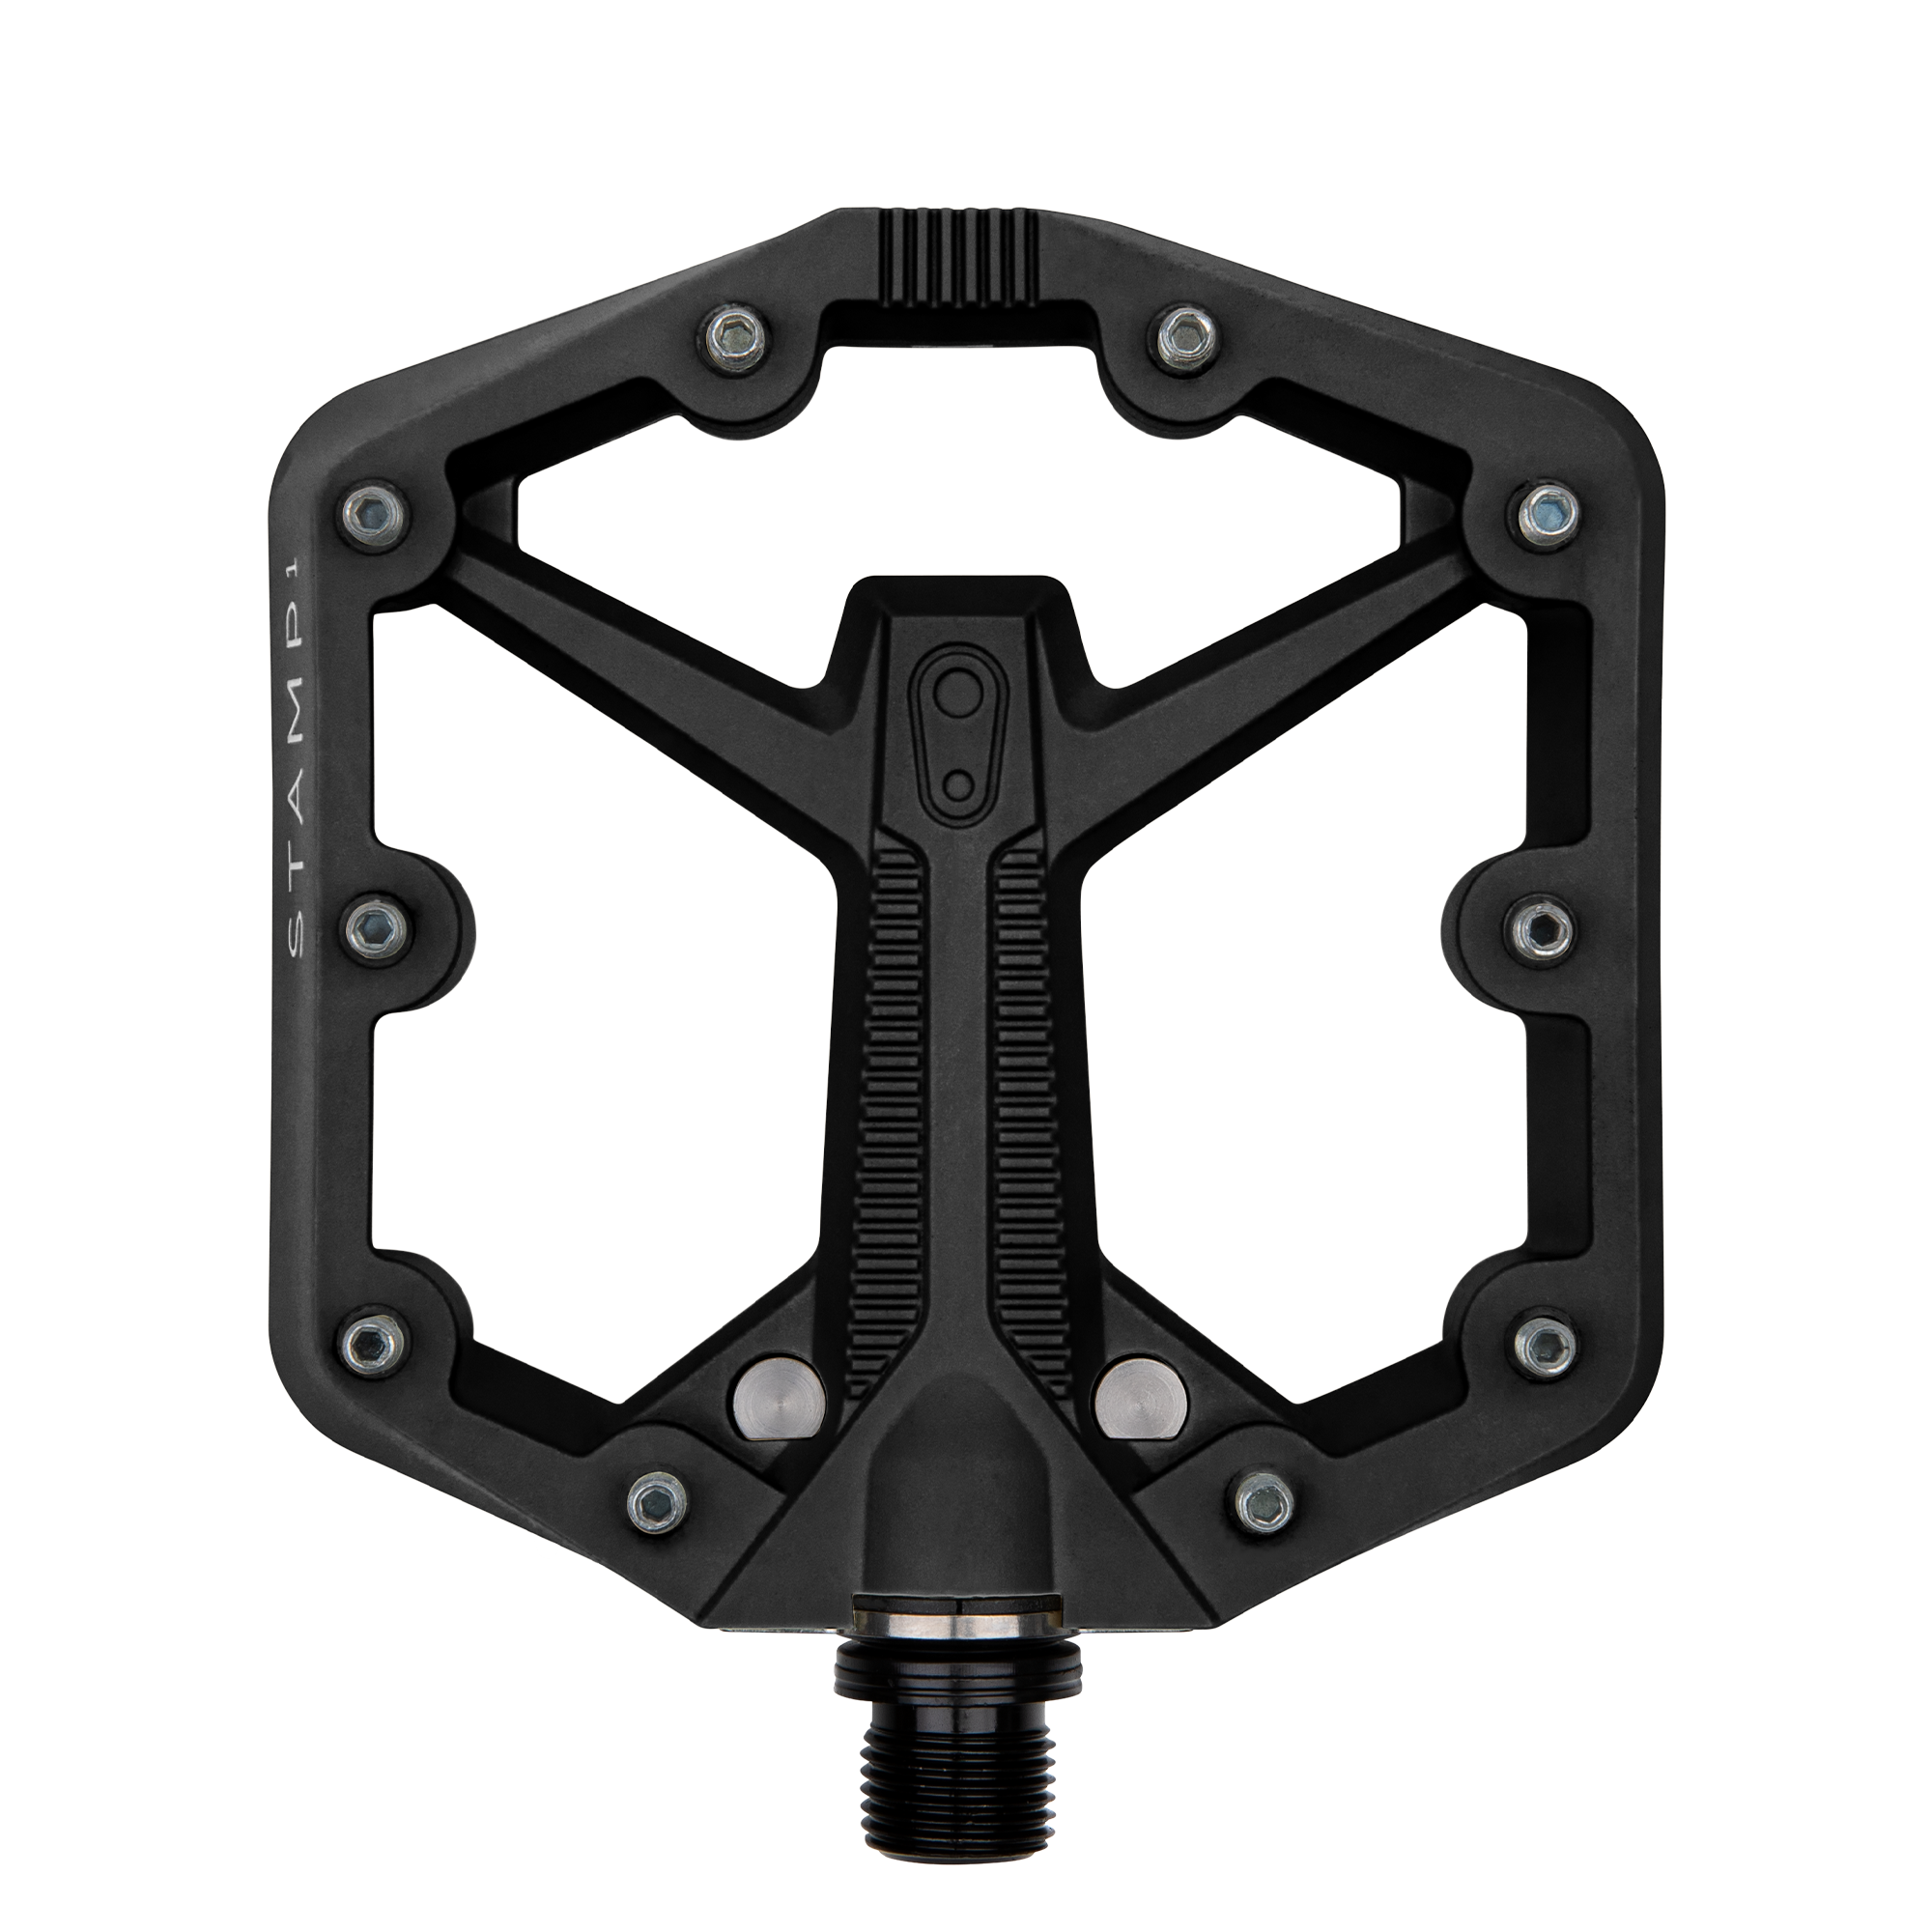  Crankbrothers Stamp 1 Small Black : Sports & Outdoors